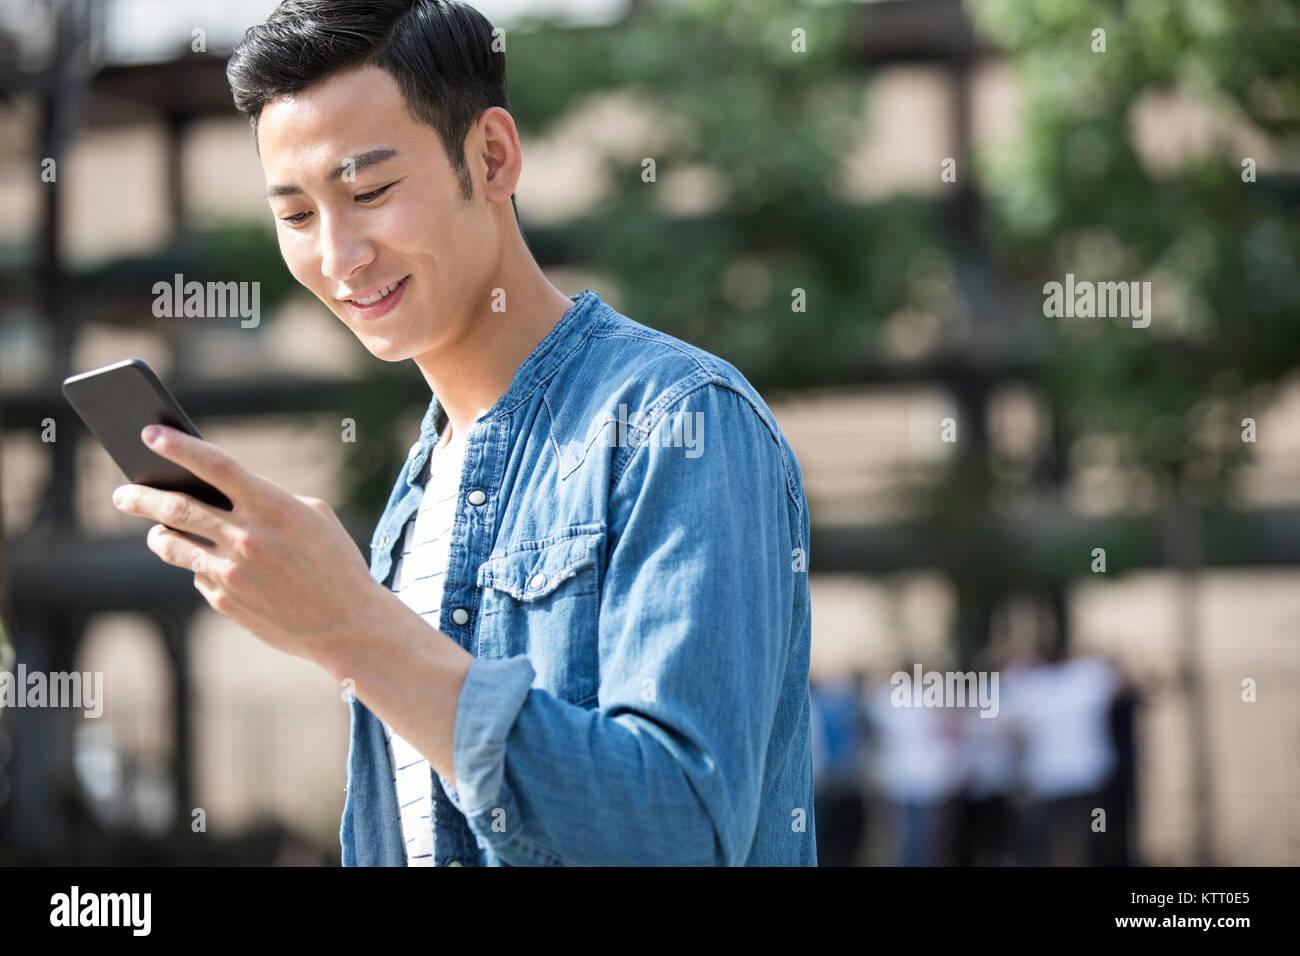 Young man using smart phone Stock Photo